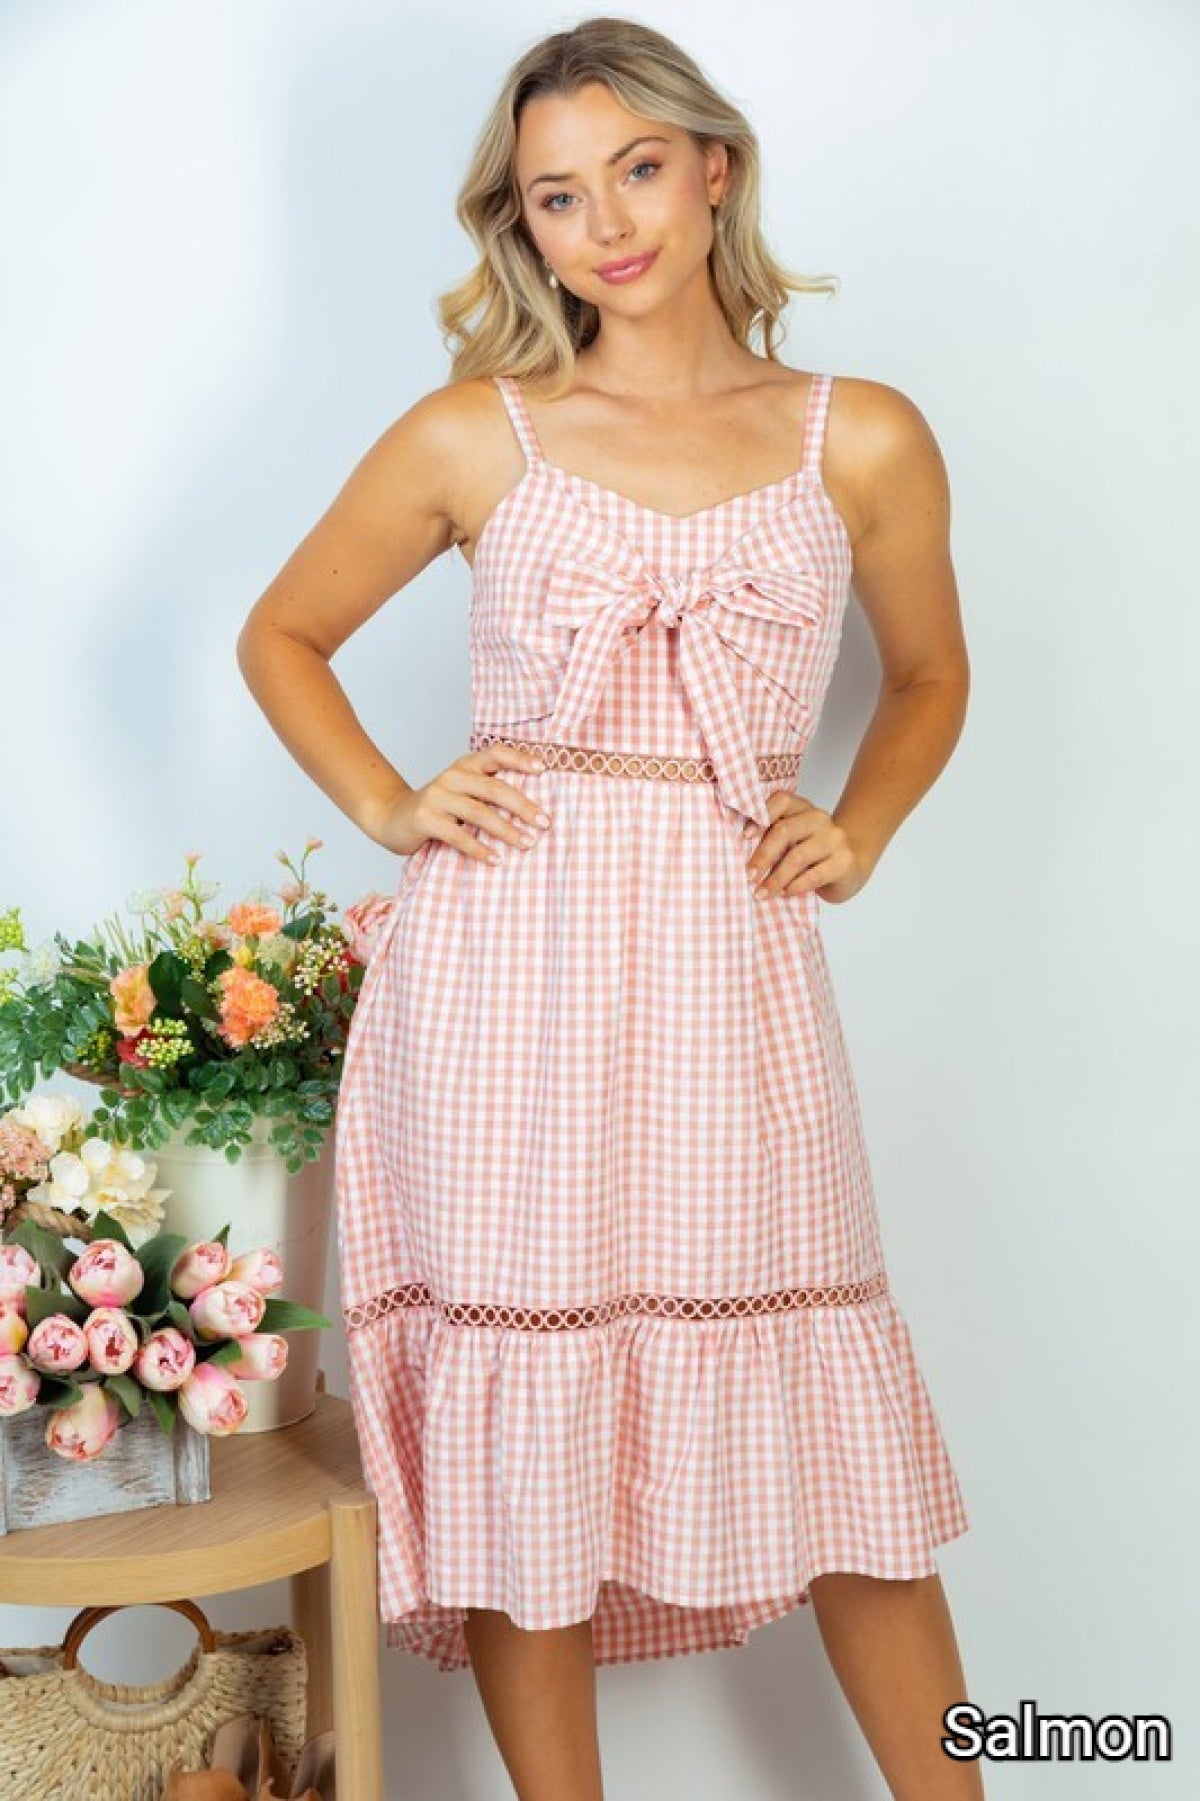 SALMON - White Birch Sleeveless Plaid Woven Dress - Ships from The US - Womens Midi Dresses at TFC&H Co.